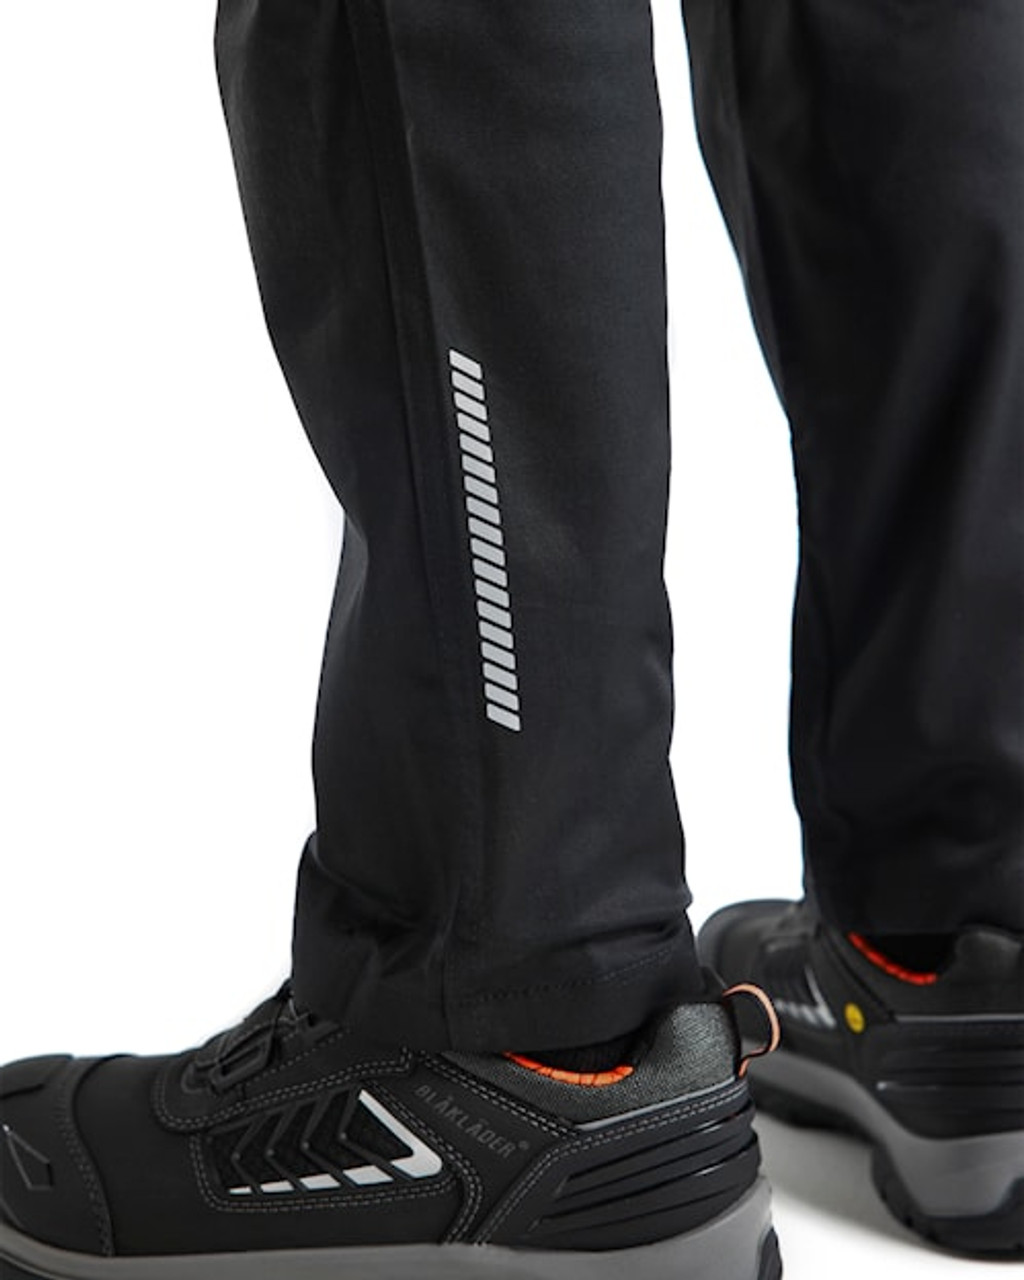 Buy online in Australia BLAKLADER Trousers for Electricians that are comfortable and durable.